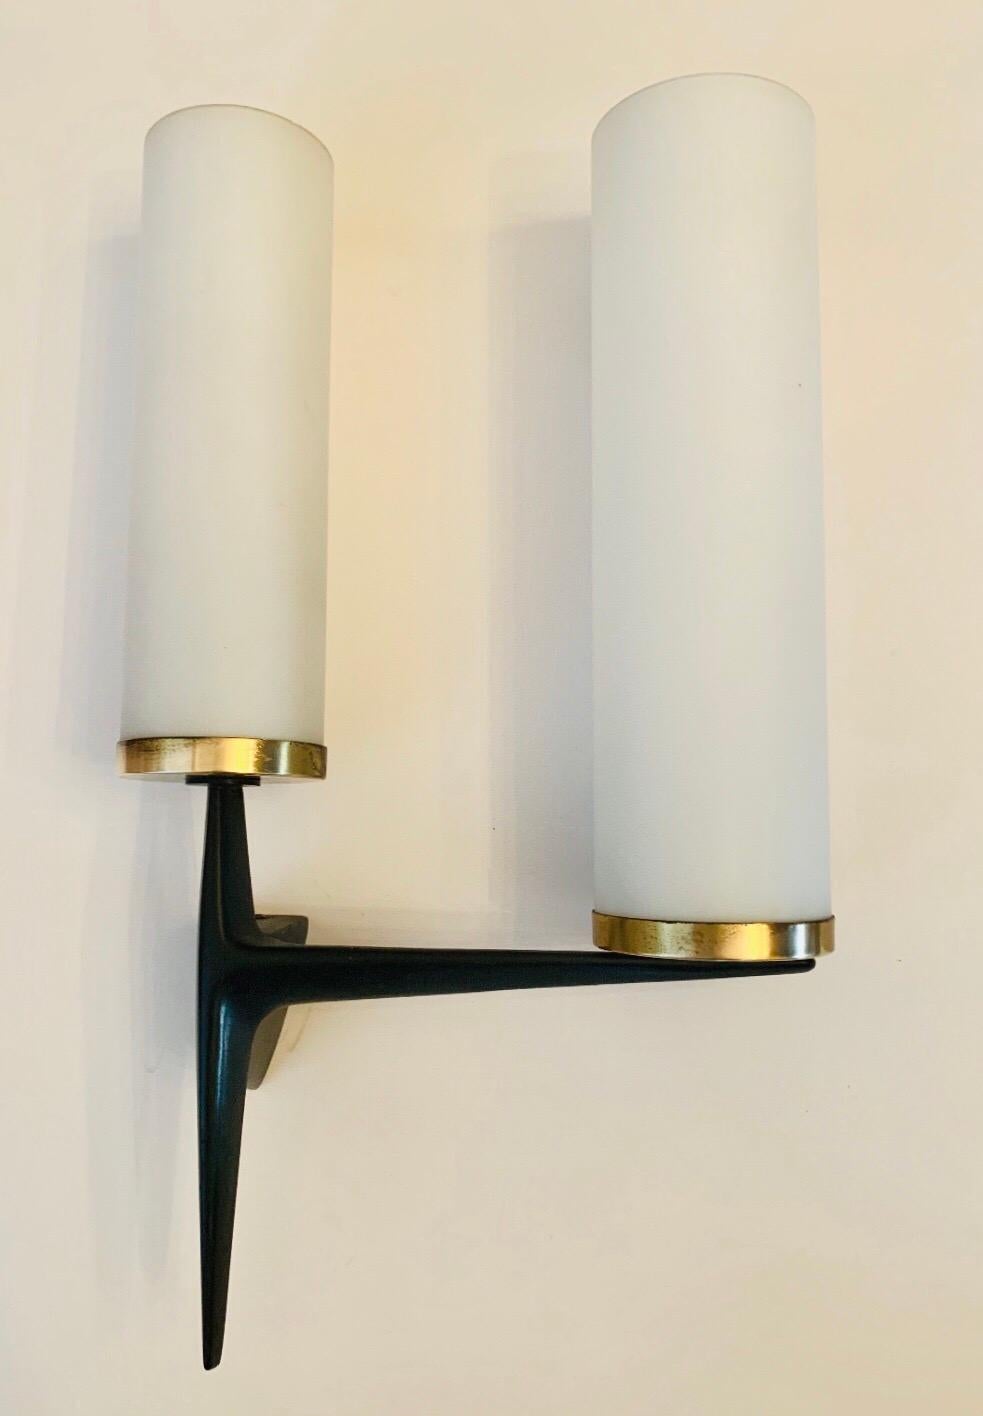 A wonderful French 1950s black matte enamel iron wall lights with white matte glass cylinder shades by Arlus. Newly rewired